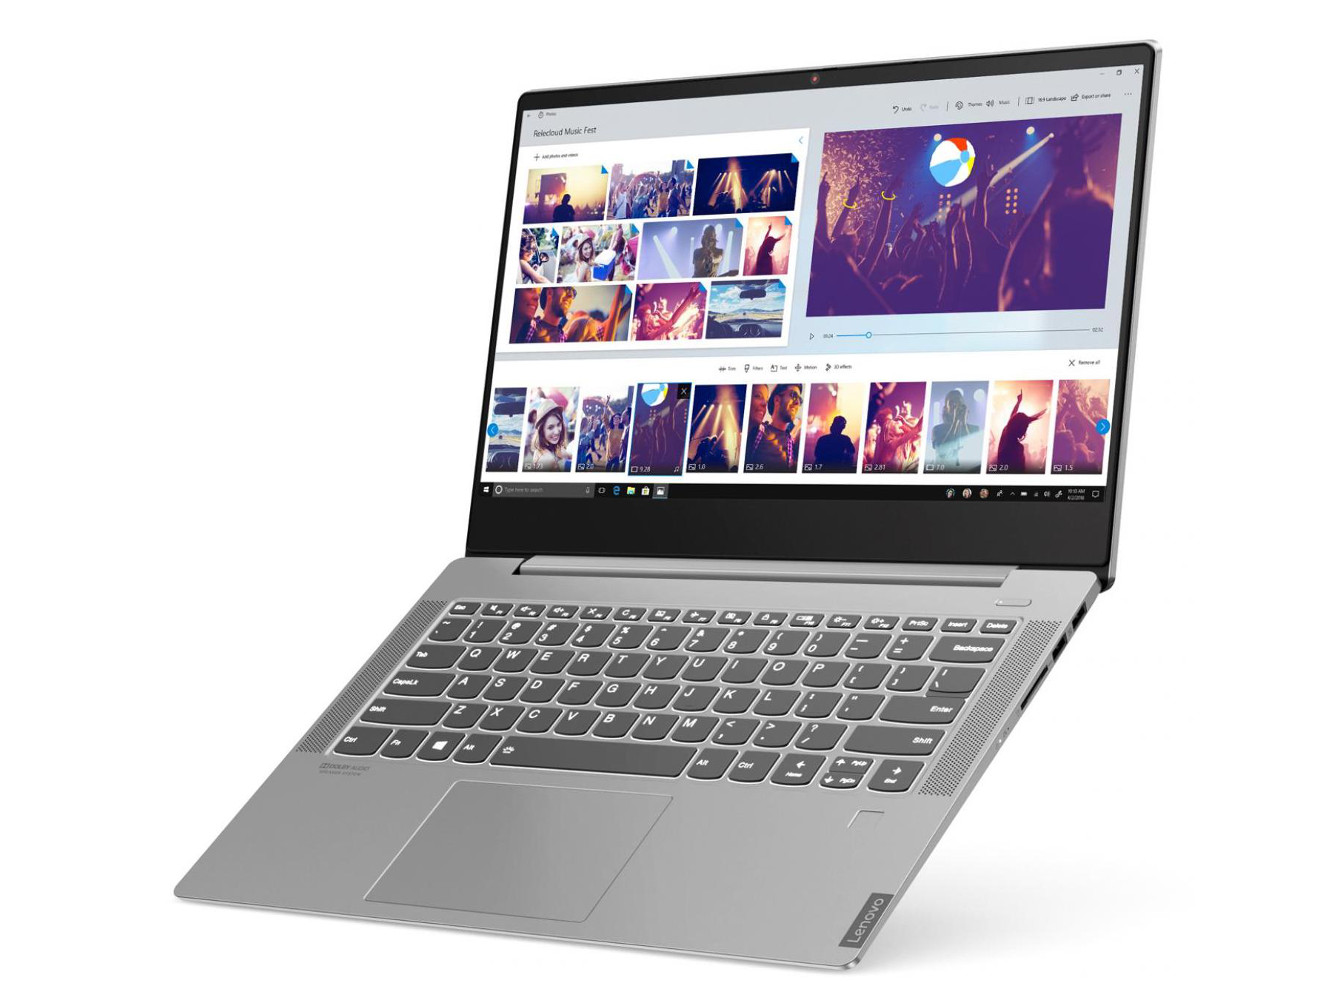 Yoga, ThinkPad, Legion… Lenovo exclusive promotions for Tom's Guide readers